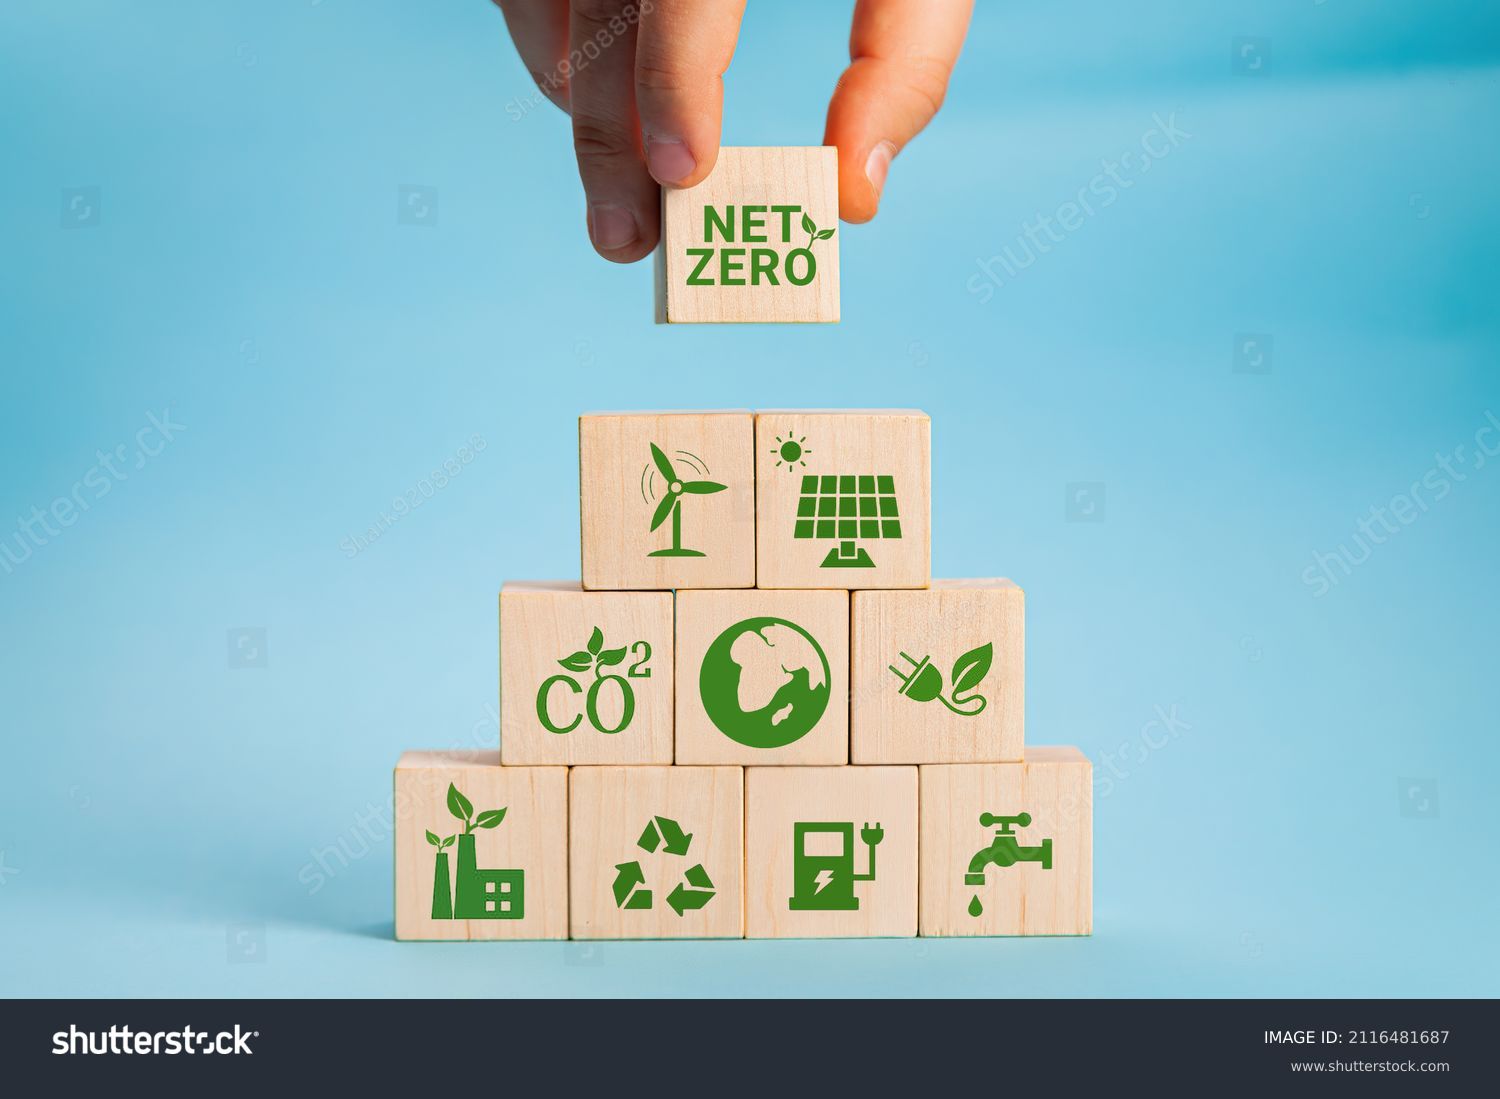 Net zero and carbon neutral concept. Net zero greenhouse gas emissions target. Climate neutral long term strategy. Hand put wooden cubes with green net zero icon and green icon on grey background. #2116481687